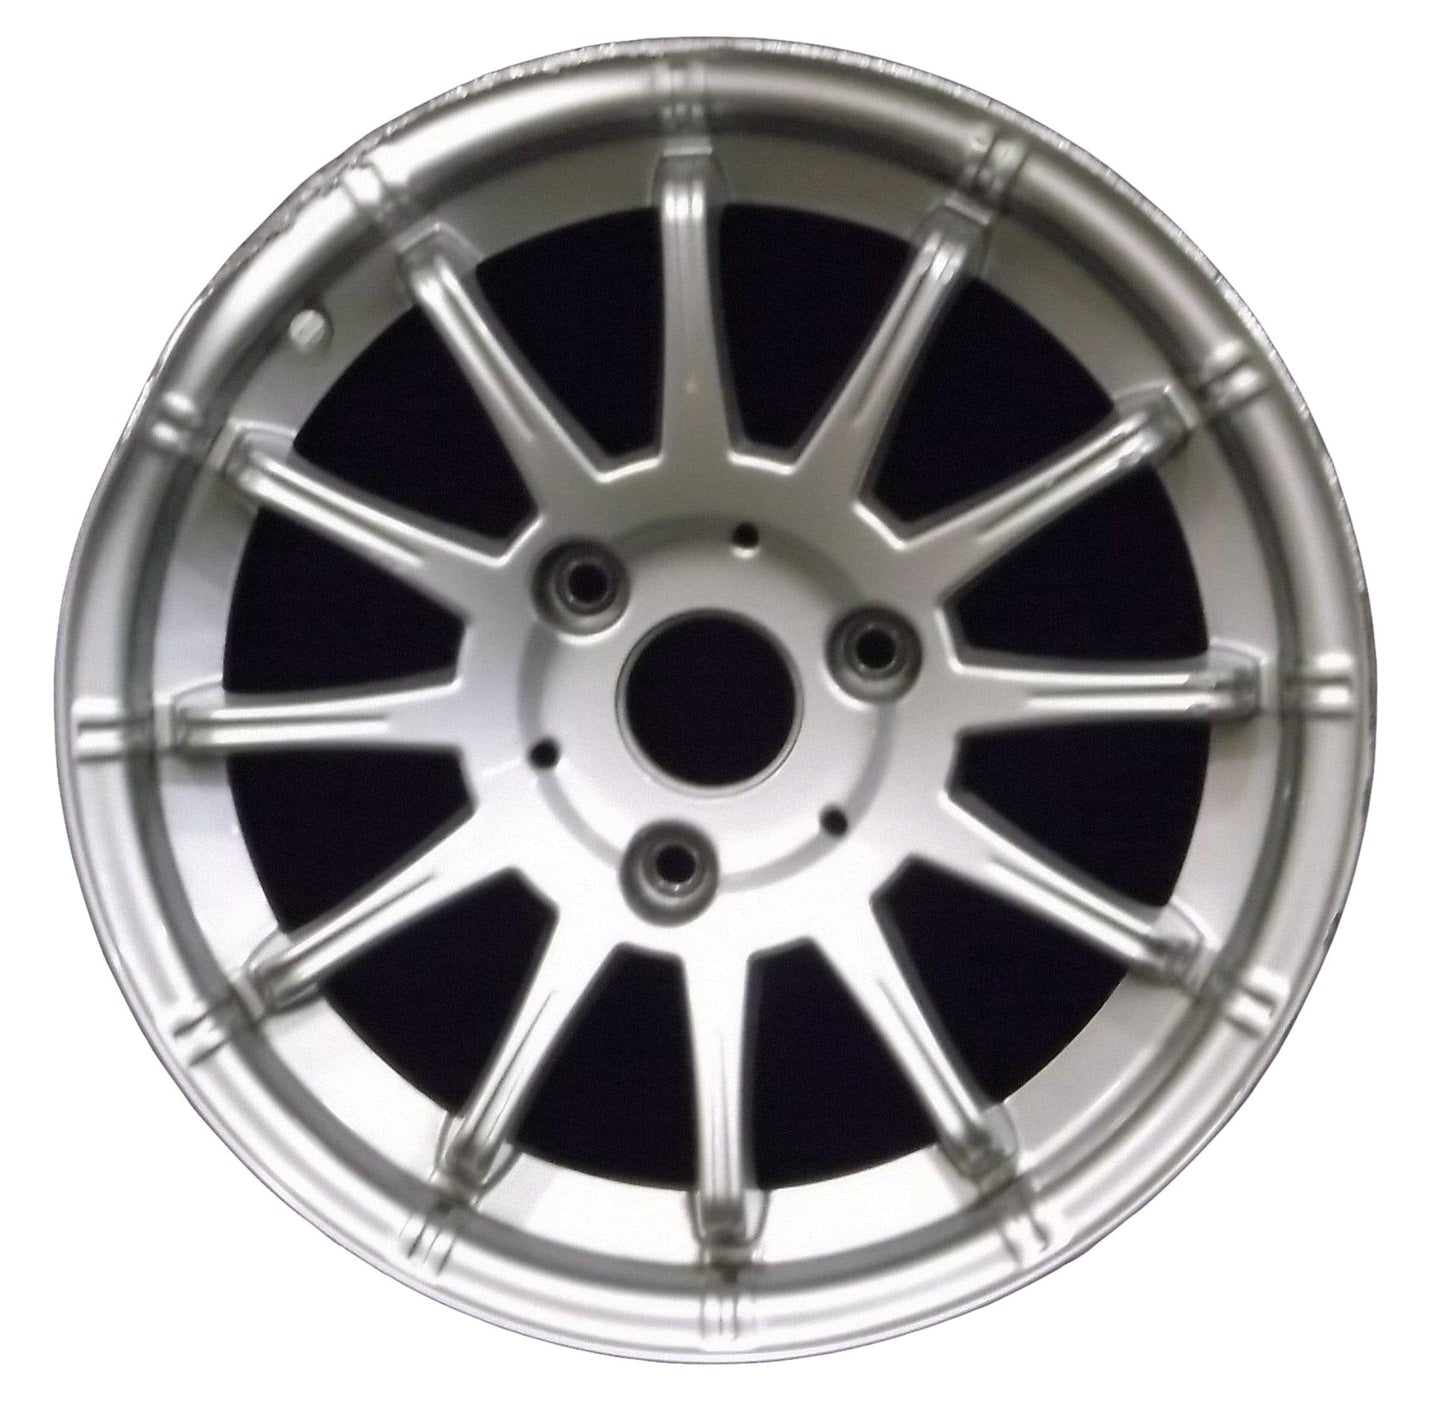 Smart ForTwo  2009, 2010, 2011, 2012, 2013, 2014 Factory OEM Car Wheel Size 15x5.5 Alloy WAO.85191RE.LS09.FF